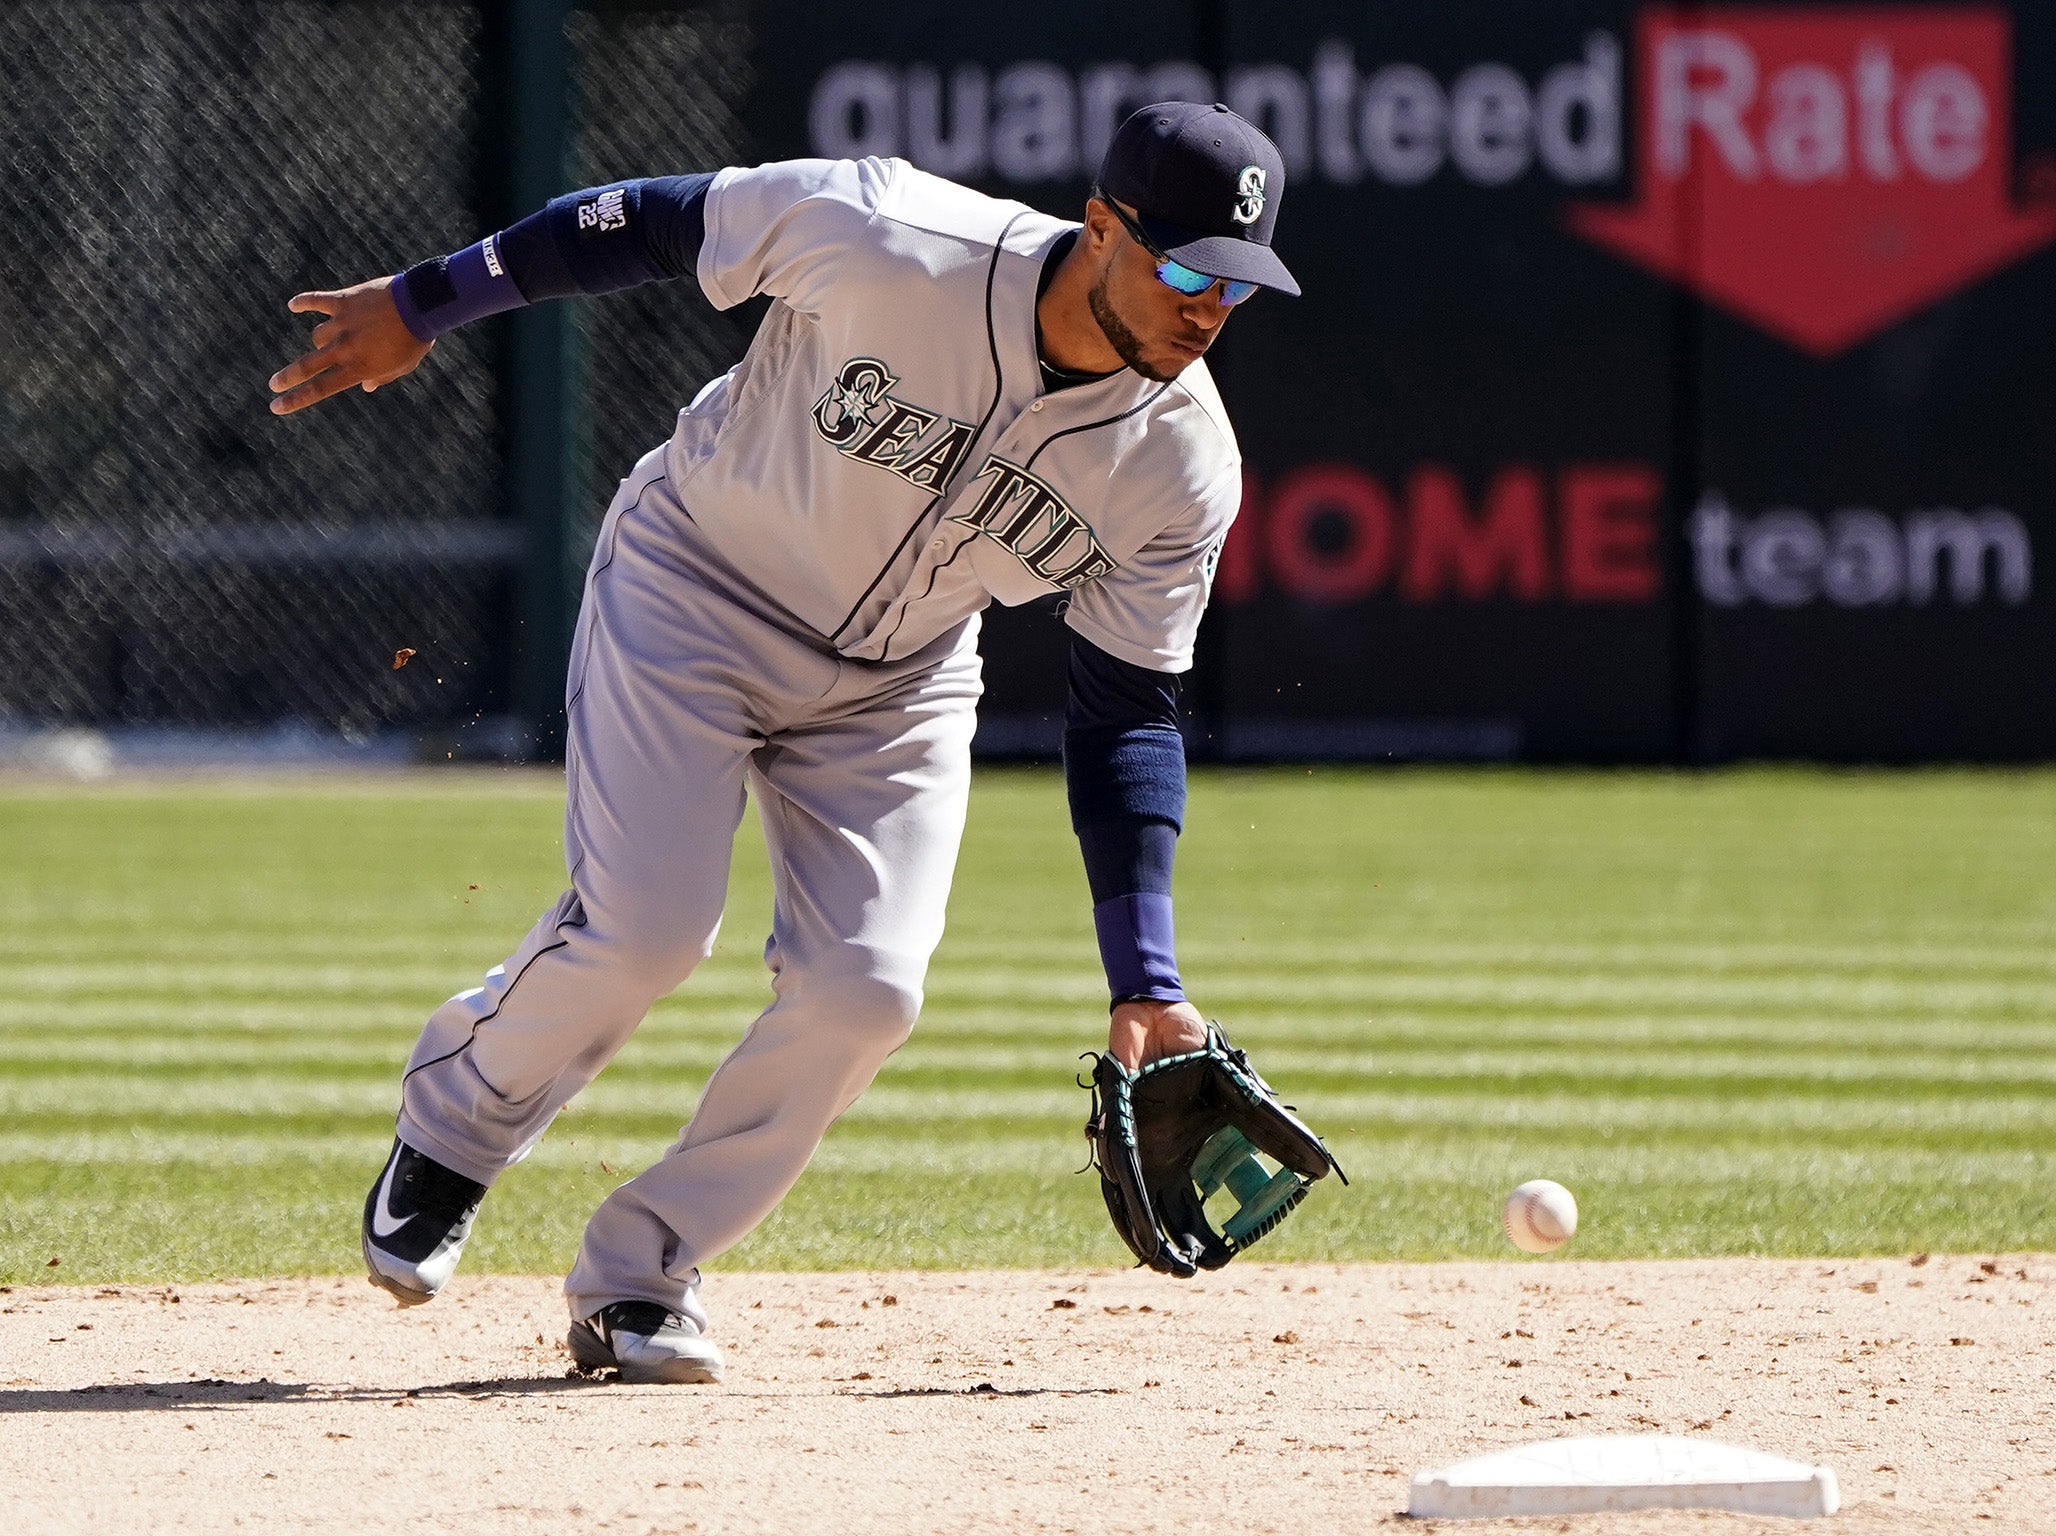 Robinson Cano Follows Clean Diet to Get Game-Ready After Suspension